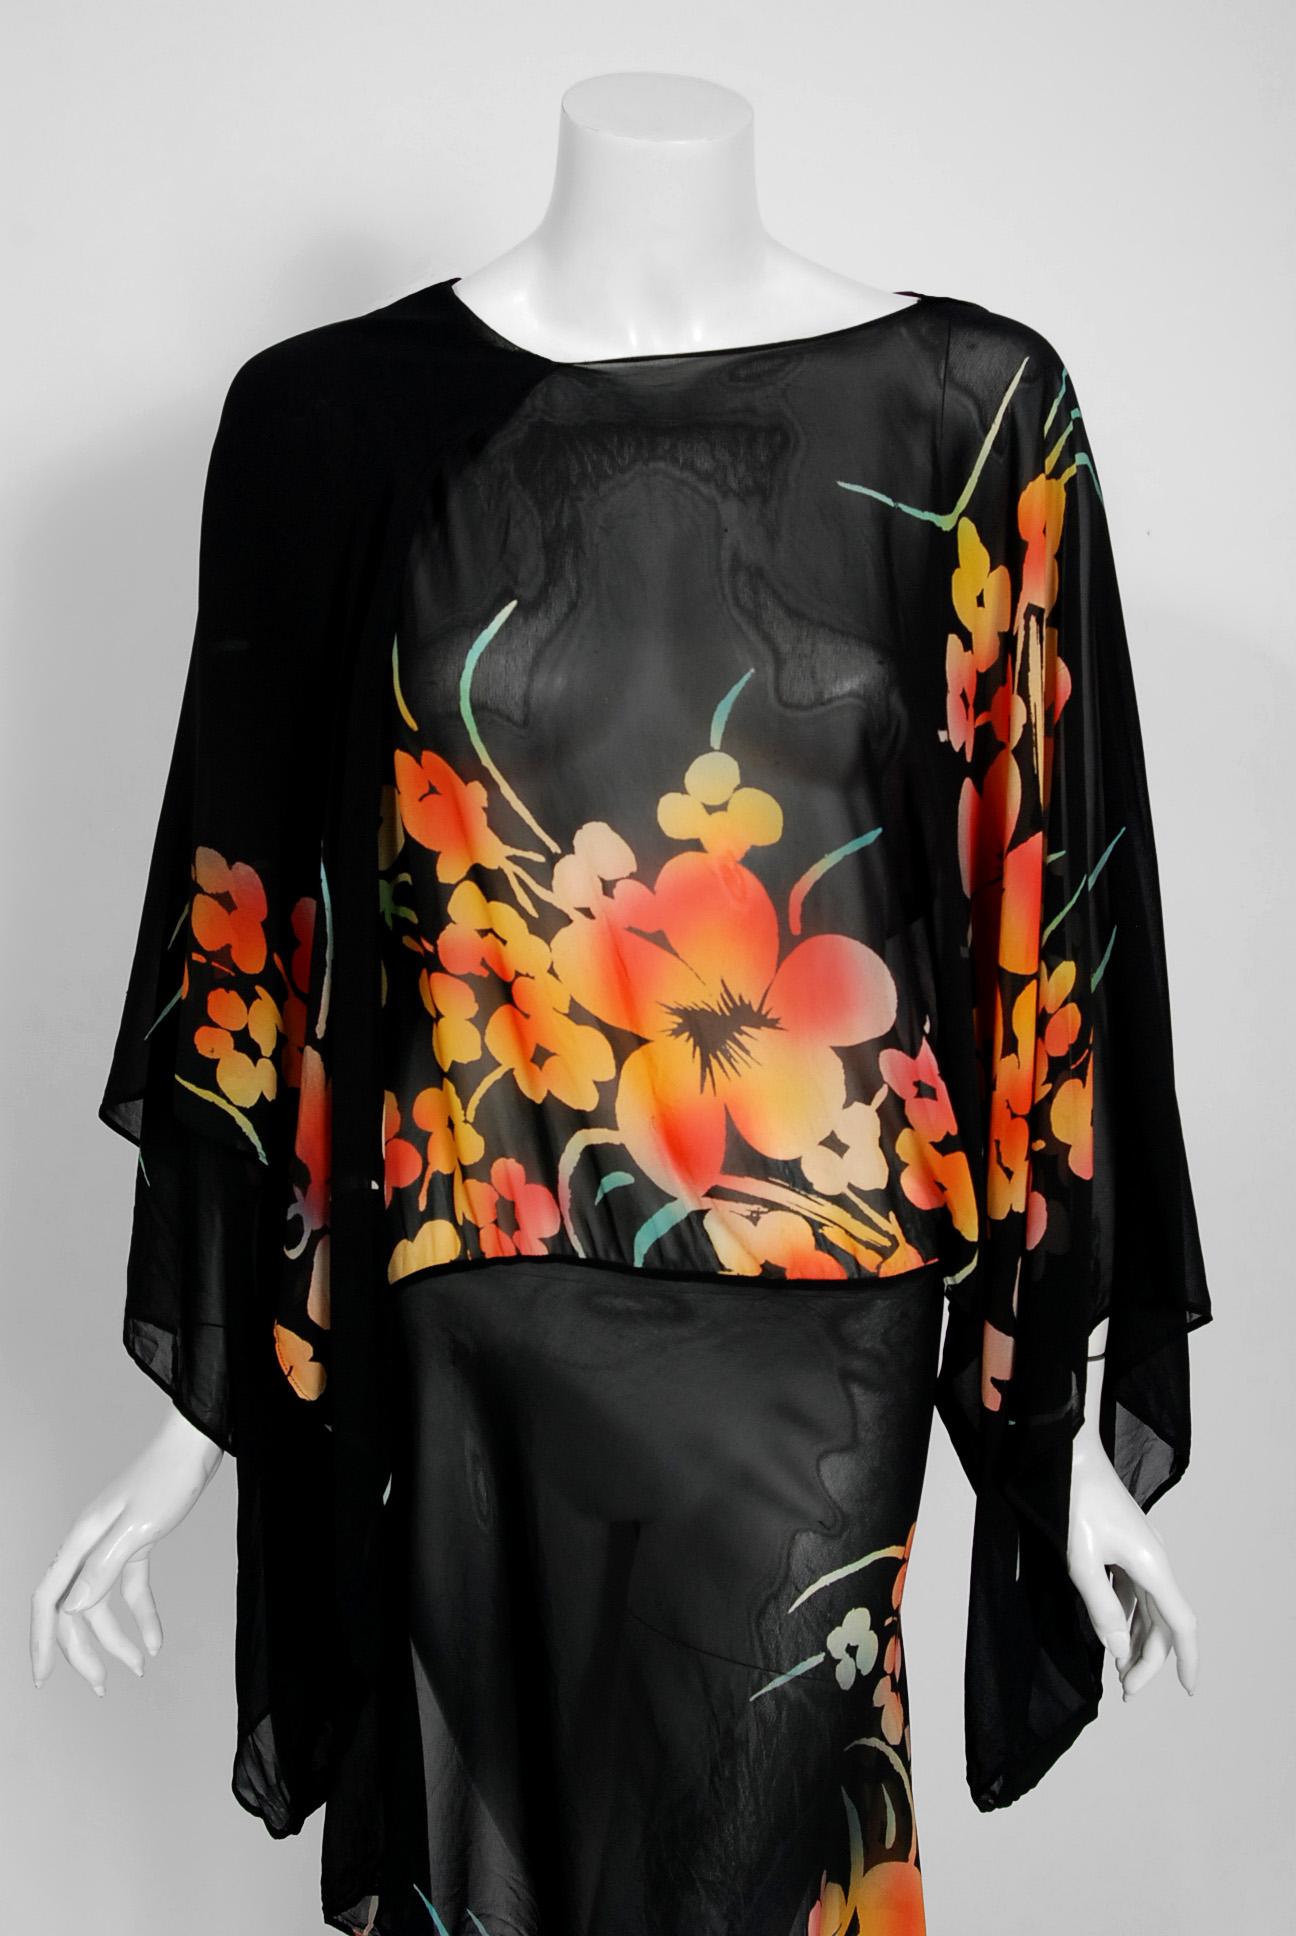 Gorgeous and extremely rare chiffon dress tunic by the famous Alice Pollock British label. Pollock is known for starting Quorum, a London boutique and manufacturing business, in 1964. The following year she was joined in the business by Ossie Clark